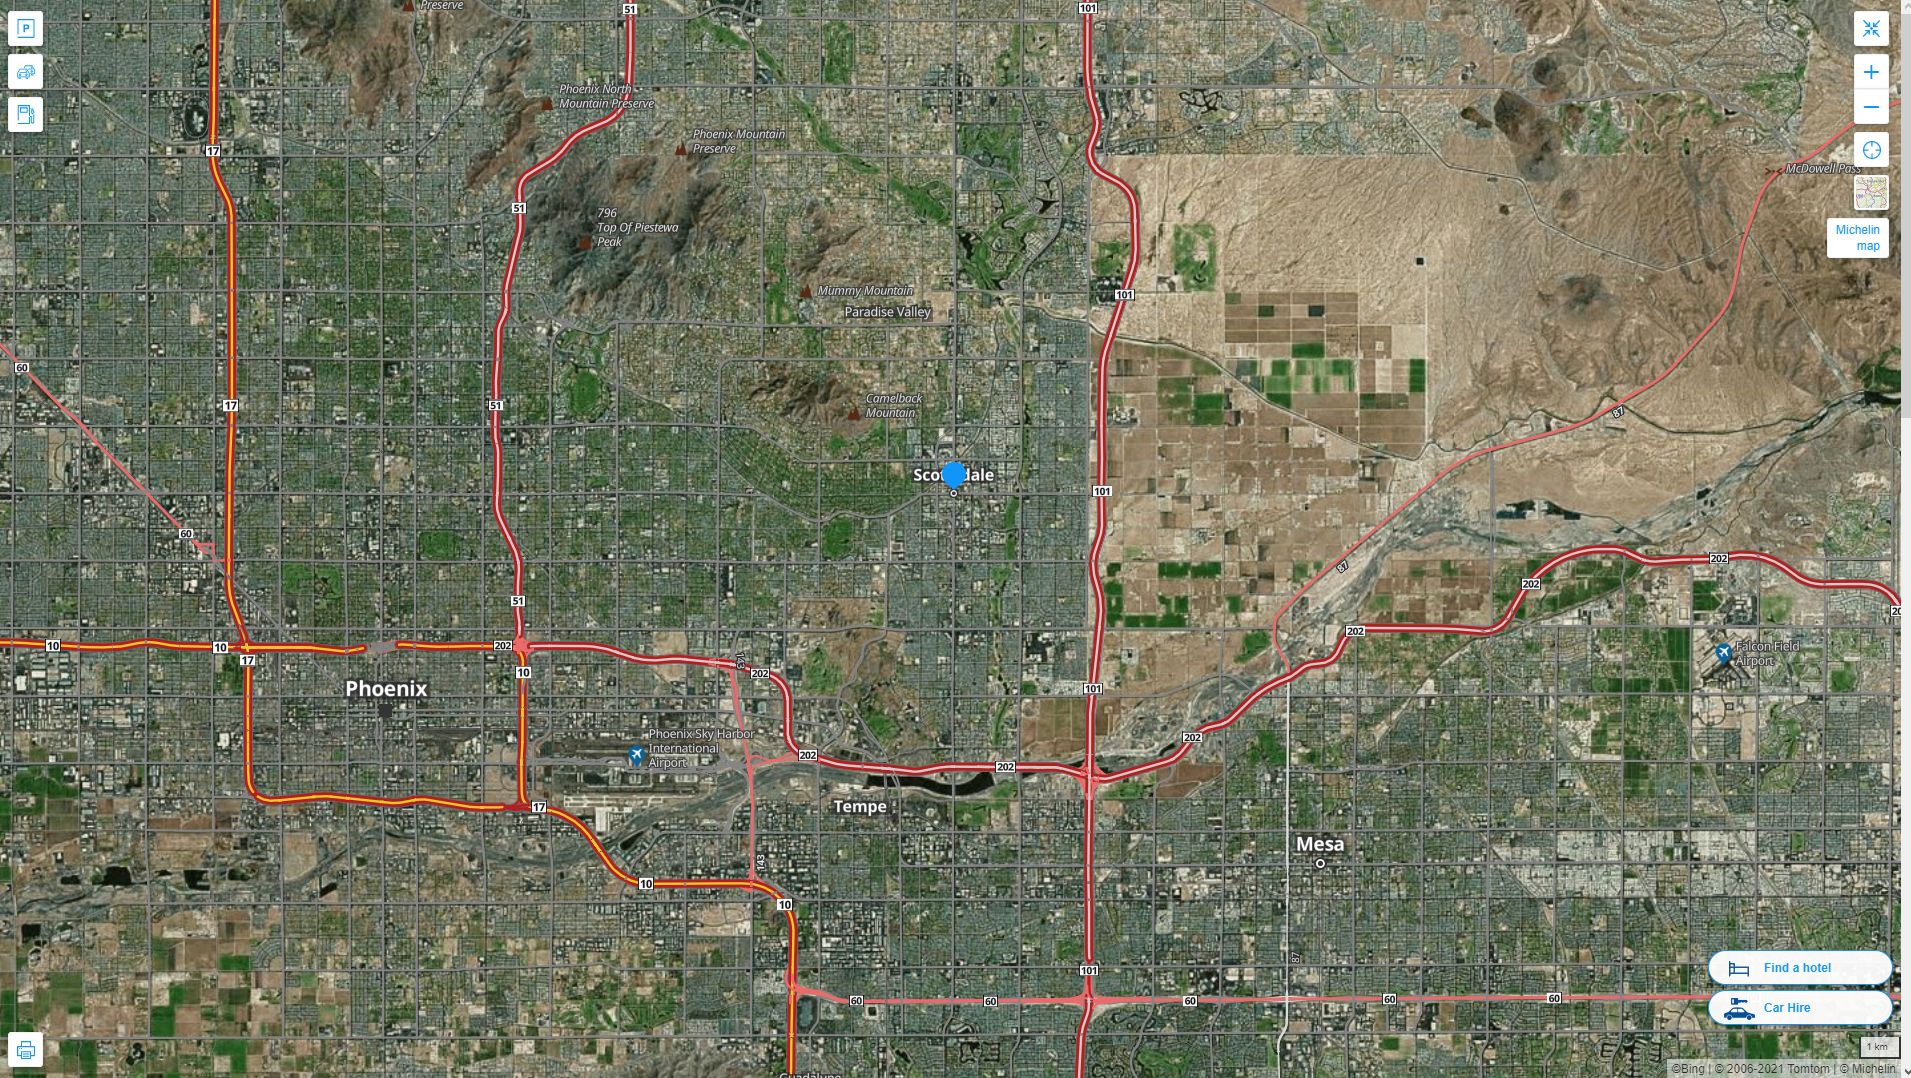 Scottsdale Arizona Highway and Road Map with Satellite View